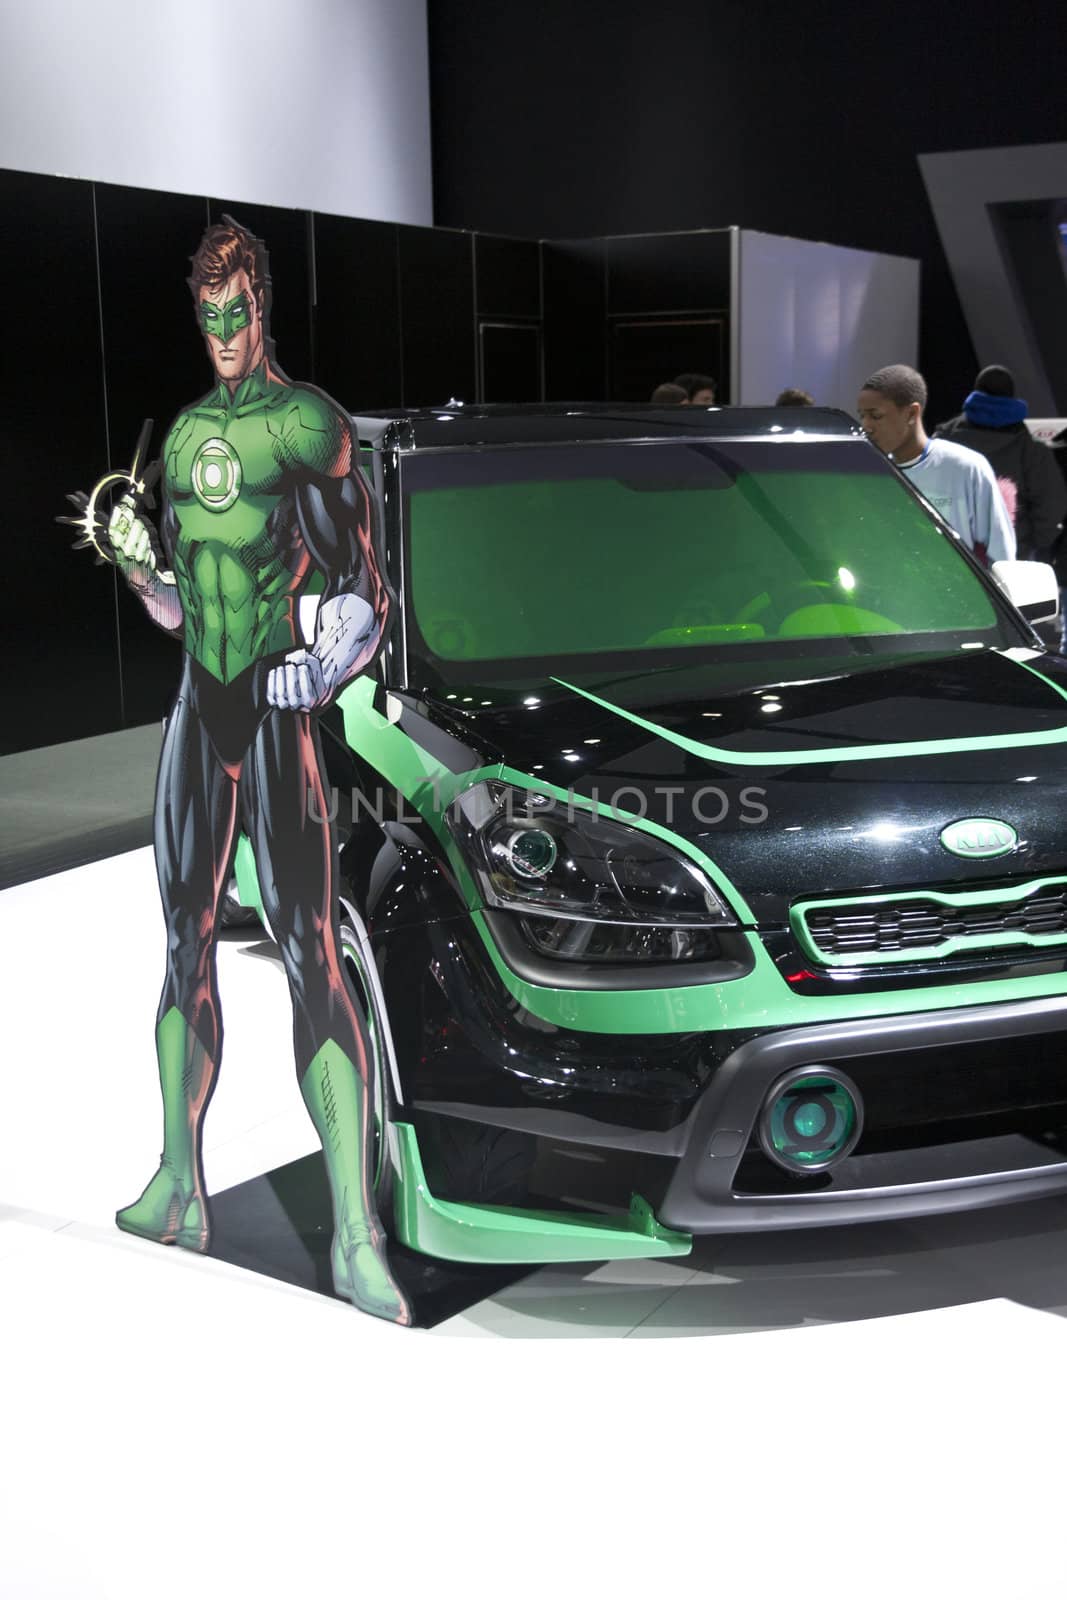 DETROIT - JANUARY 27 :The KIA green hornet concept at The North American International Auto Show January 27, 2013 in Detroit, Michigan. 